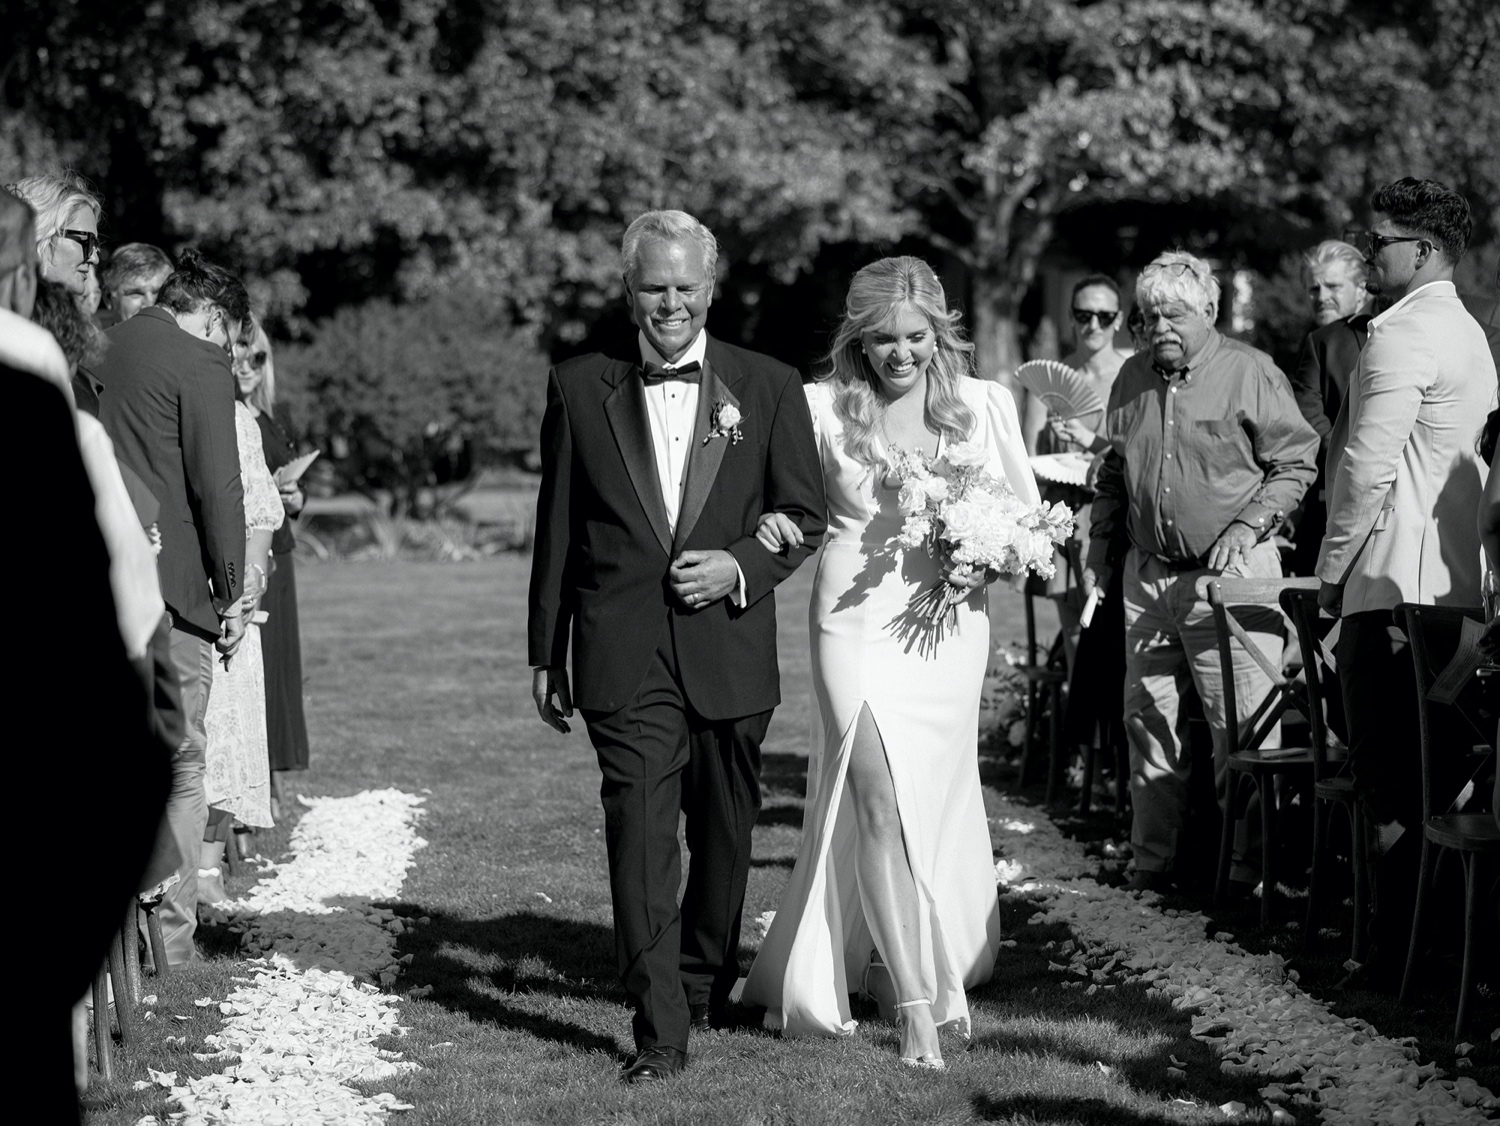 father of the bride walks the bride down the aisle at southern inspired wedding